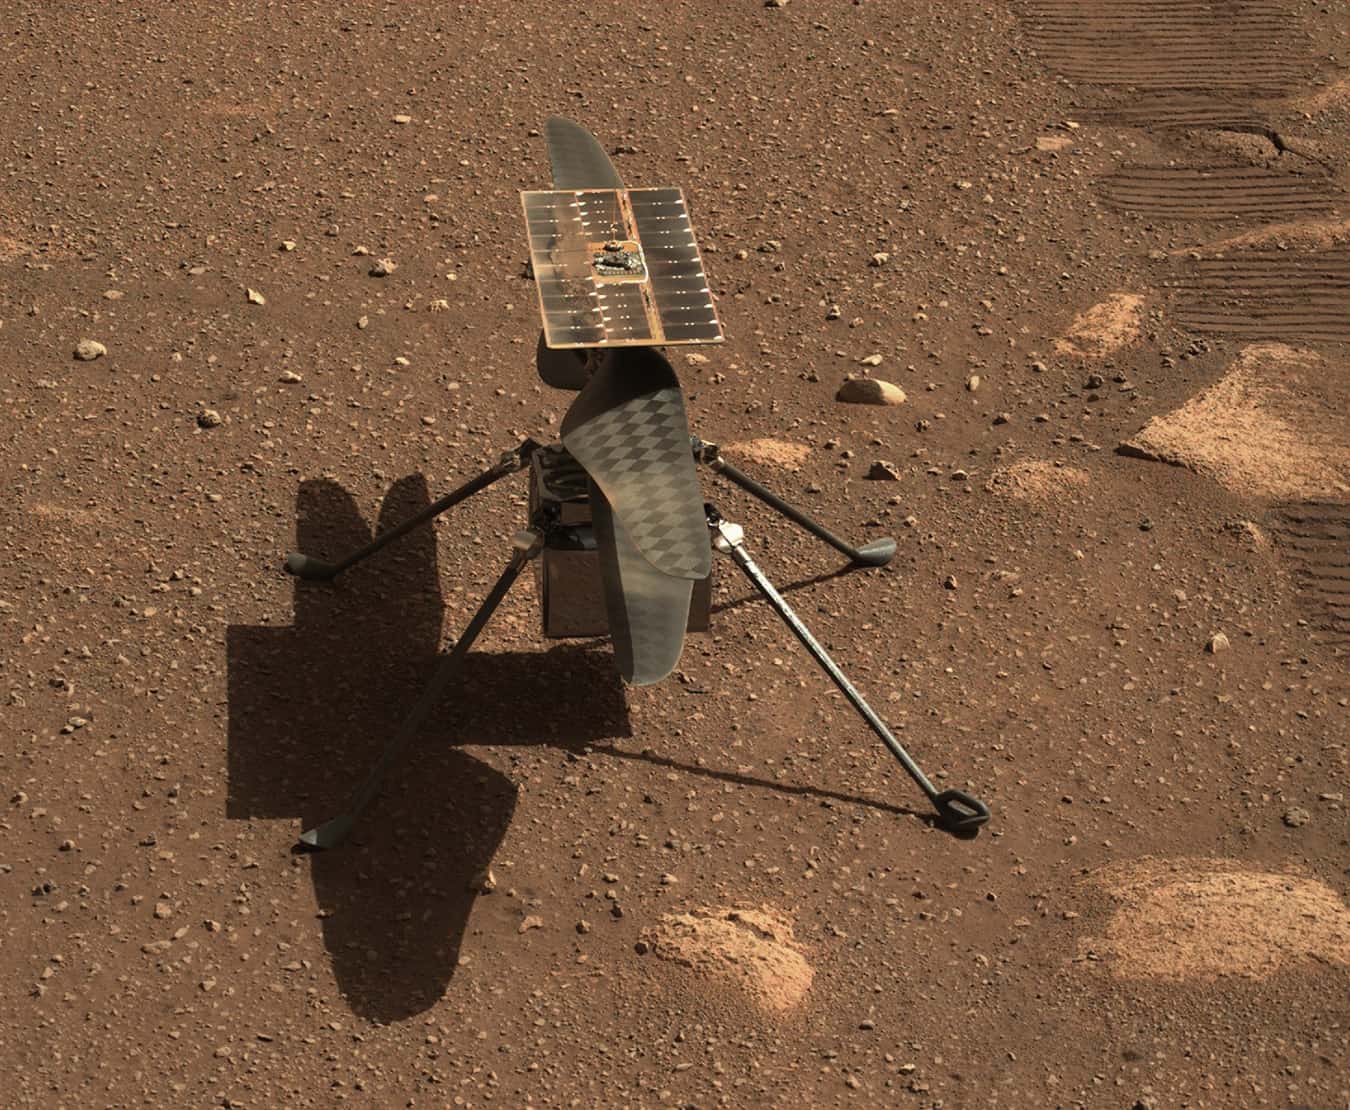 NASA’s Ingenuity Mars helicopter is seen here in a close-up taken by Mastcam-Z, a pair of zoomable cameras aboard the Perseverance rover. This image was taken on April 5, the 45th Martian day, or sol, of the mission.